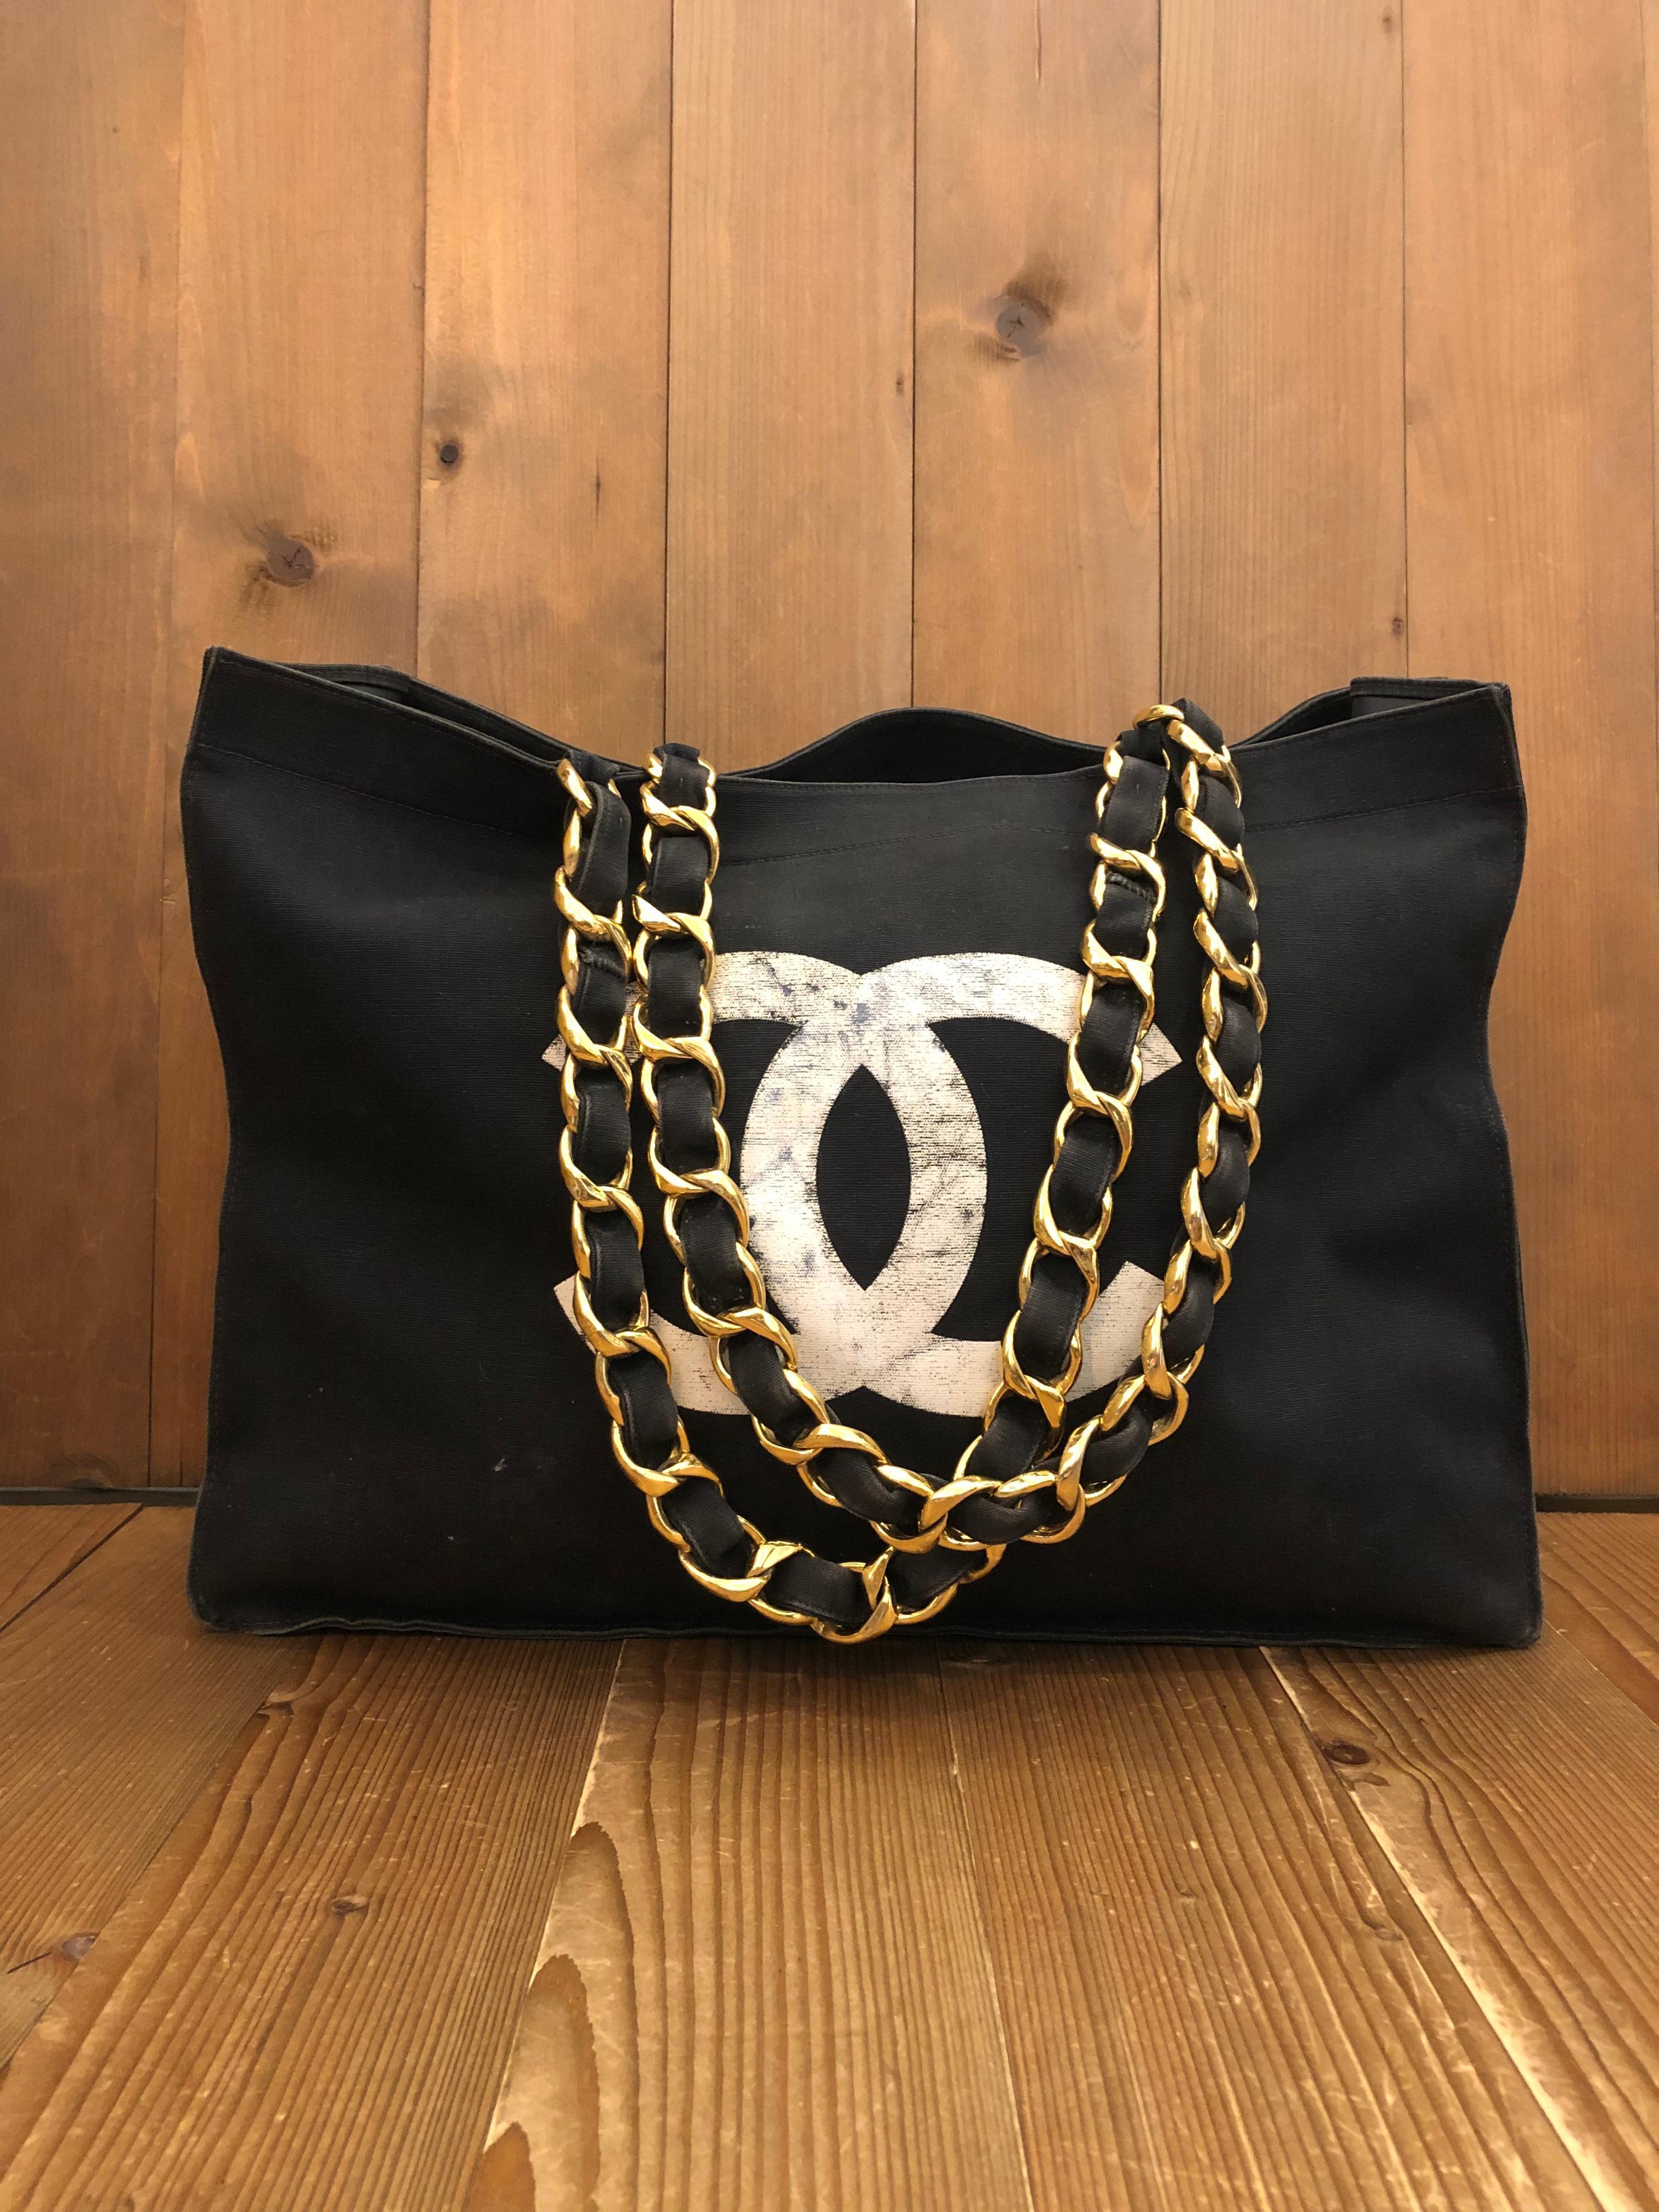 This vintage CHANEL jumbo chain tote is crafted of black canvas featuring a massive screen printed CC logo and “CHANEL” letters. This tote has two sturdy gold toned shoulder chains interlaced with black canvas that opens to a coated interior in